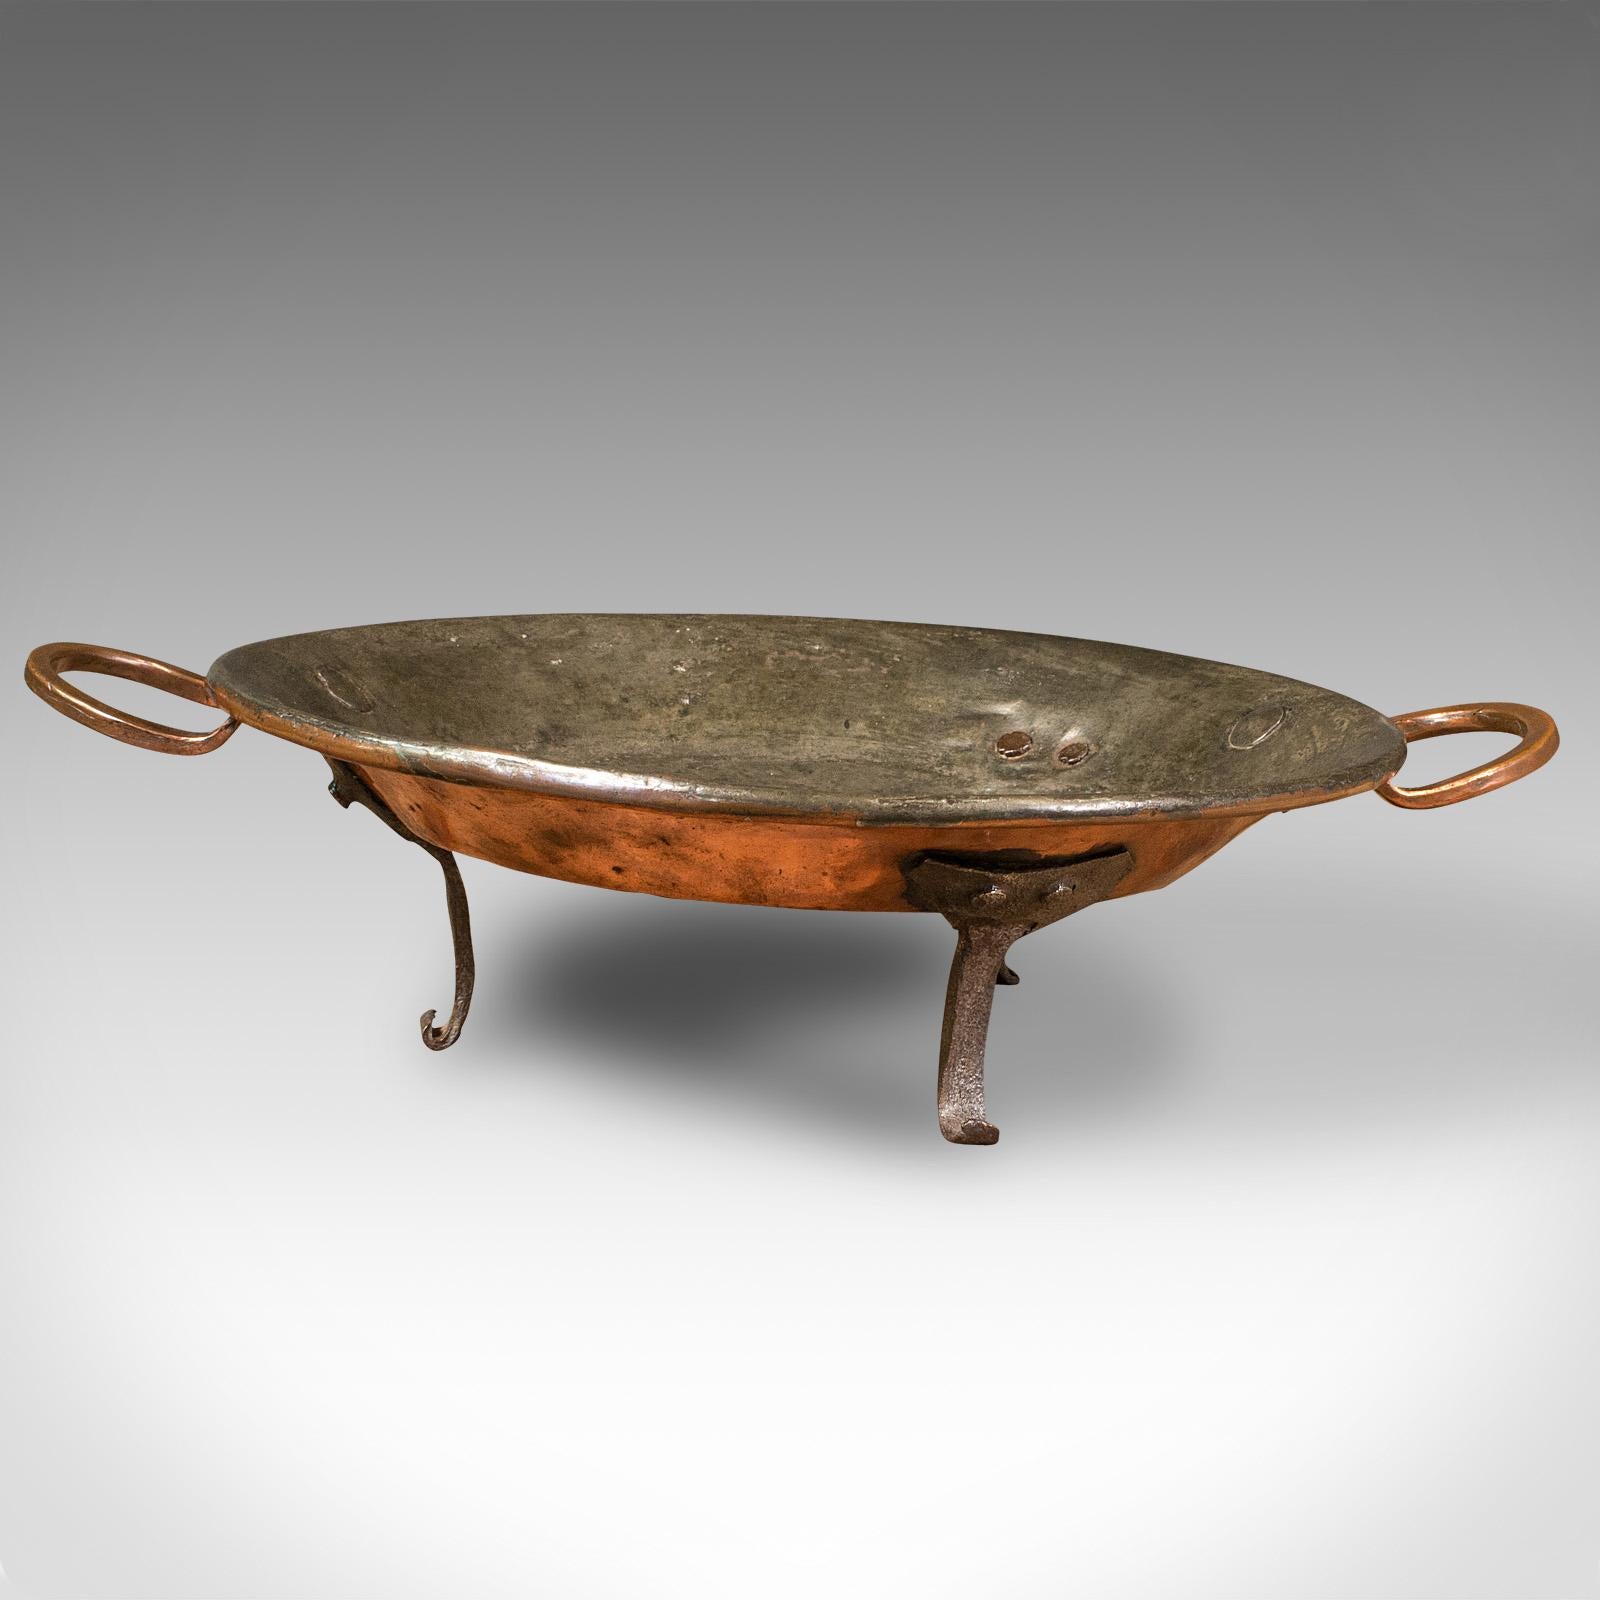 18th Century Antique Cooking Dish, English, Copper, Decorative Tray, Historic, Georgian, 1750 For Sale